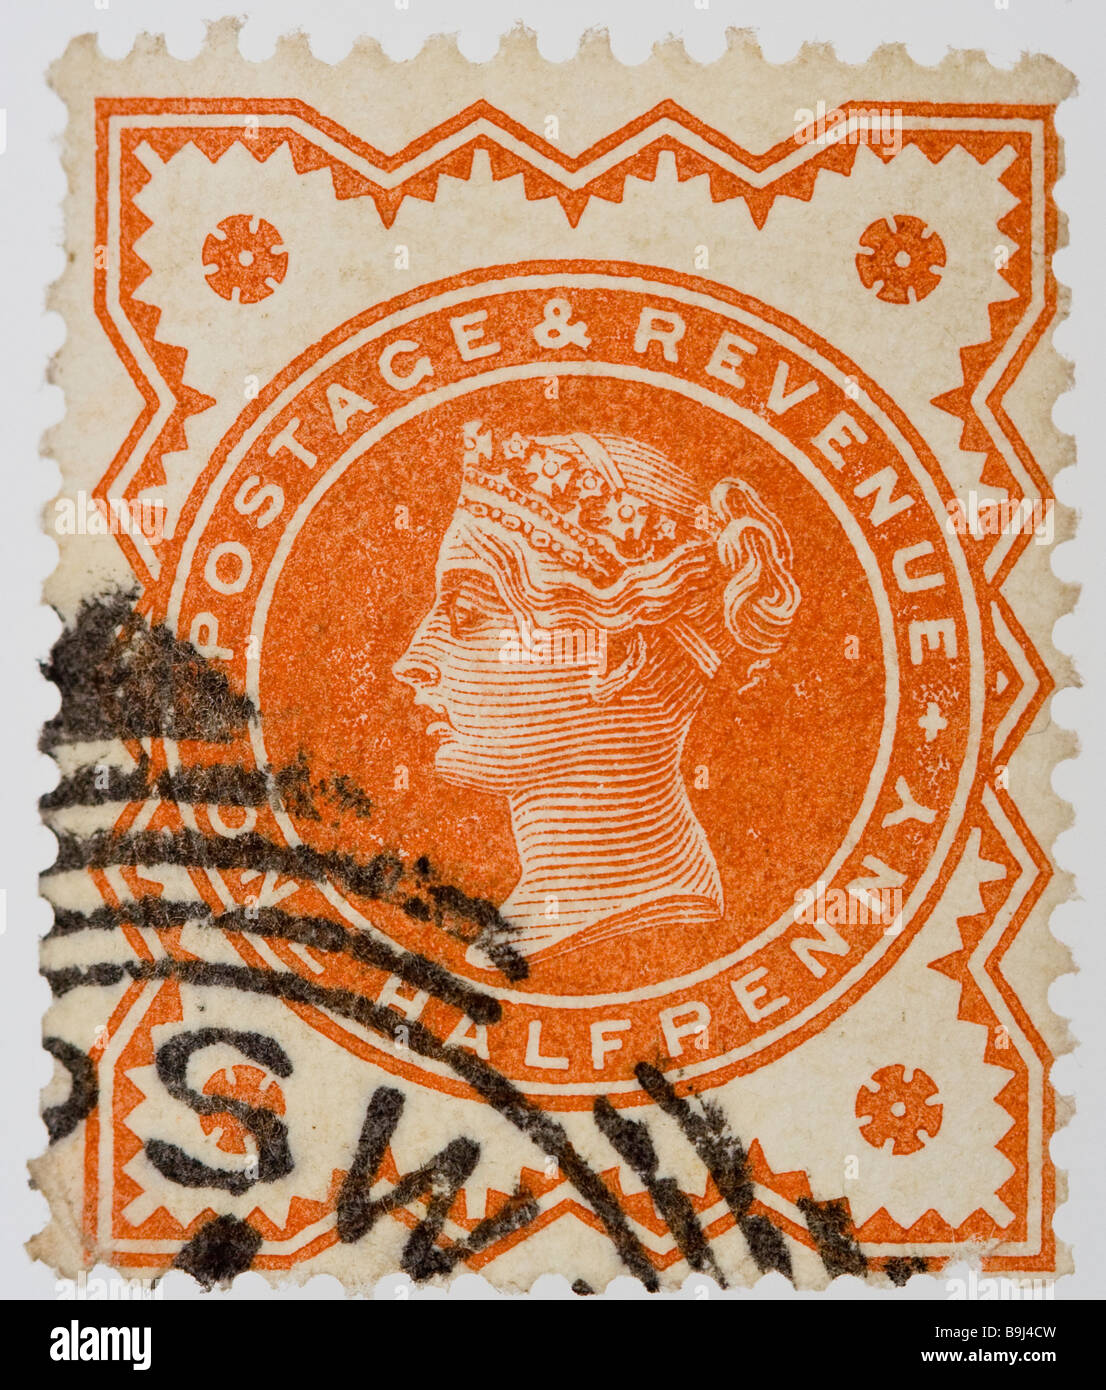 Close up of ½d, one half penny orange Victorian British Postal stamp on white background issued between 1887-1900, part of the 'Jubilee Issue'. Used. Stock Photo